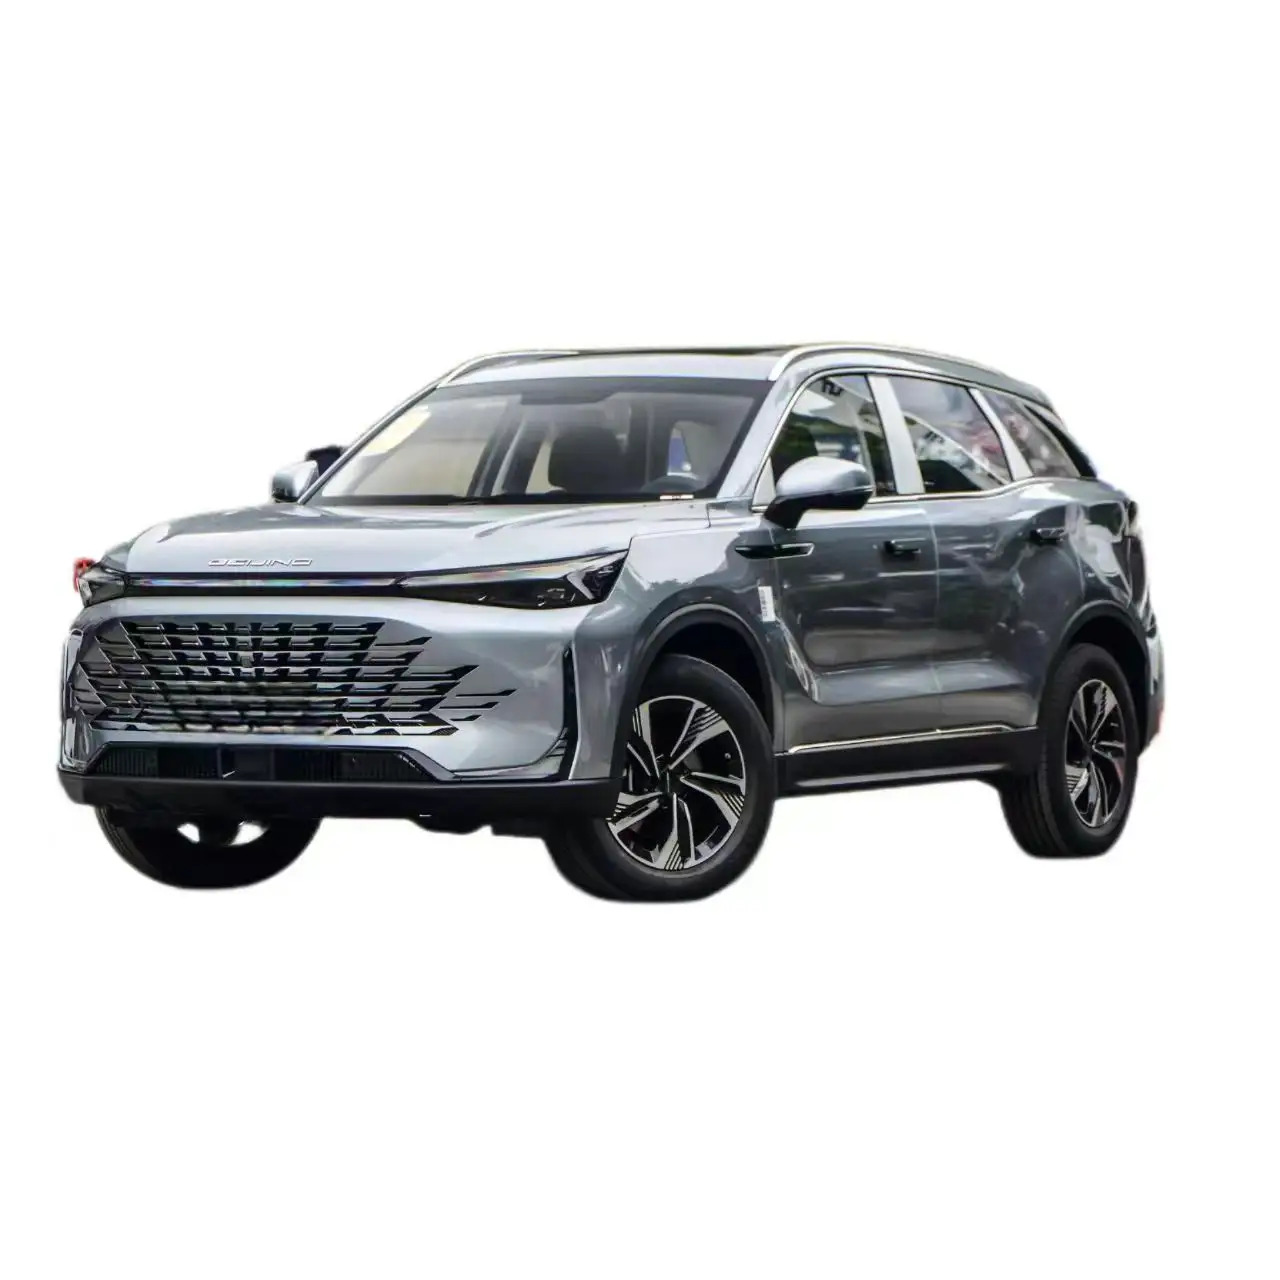 Cheap used cars Beijing X7 compact suv5 door 5 seats gasoline turbo FWD 5seats save fuel Chinese auto car